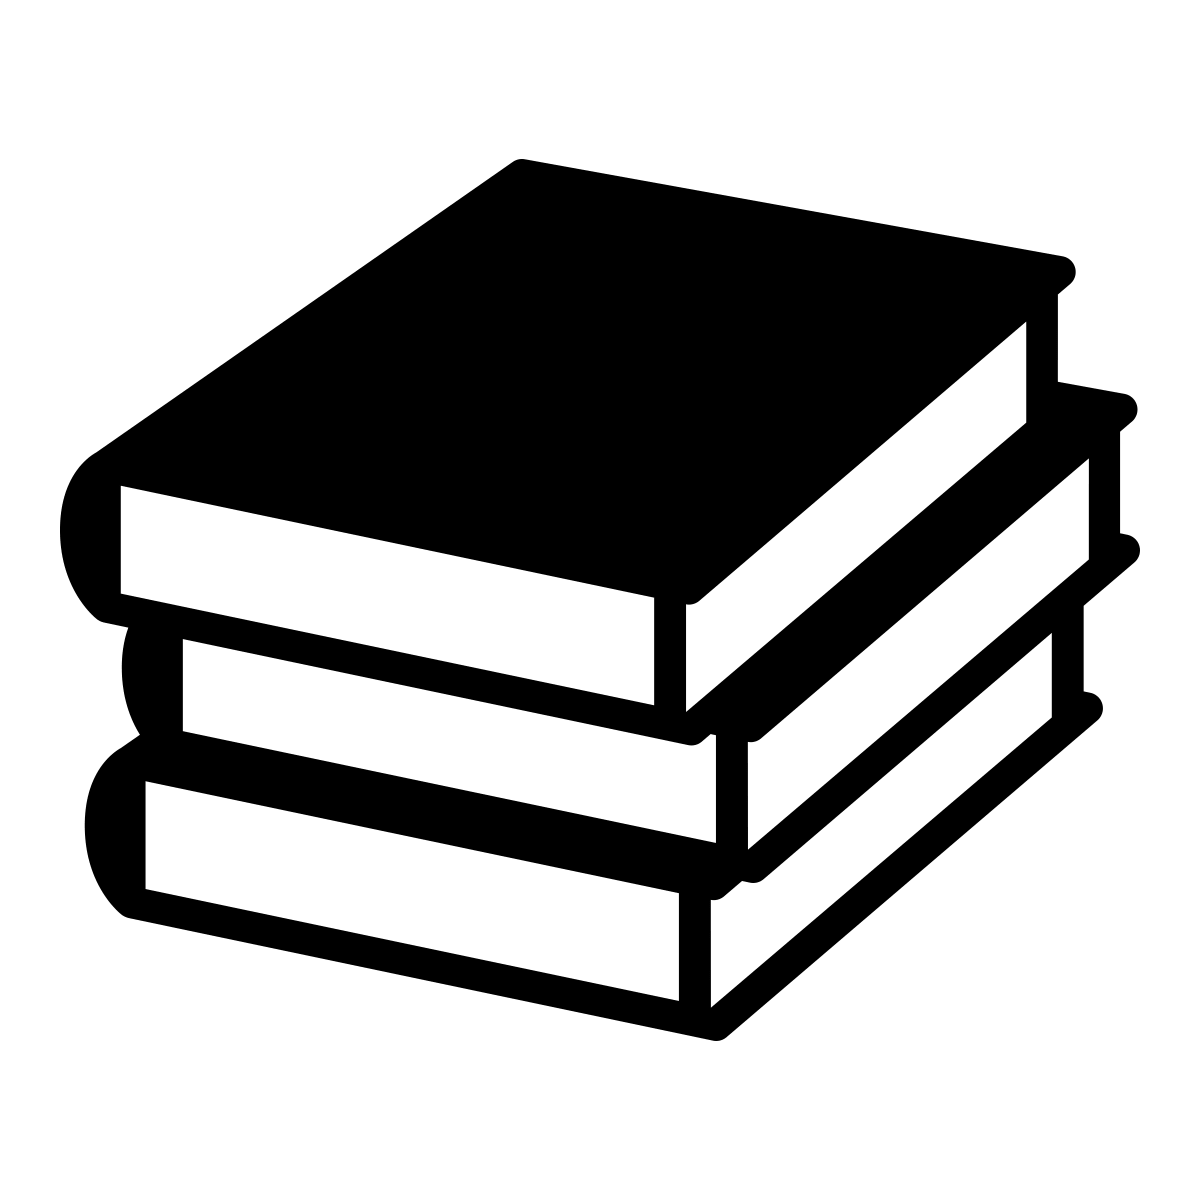 black and white stack of books icon